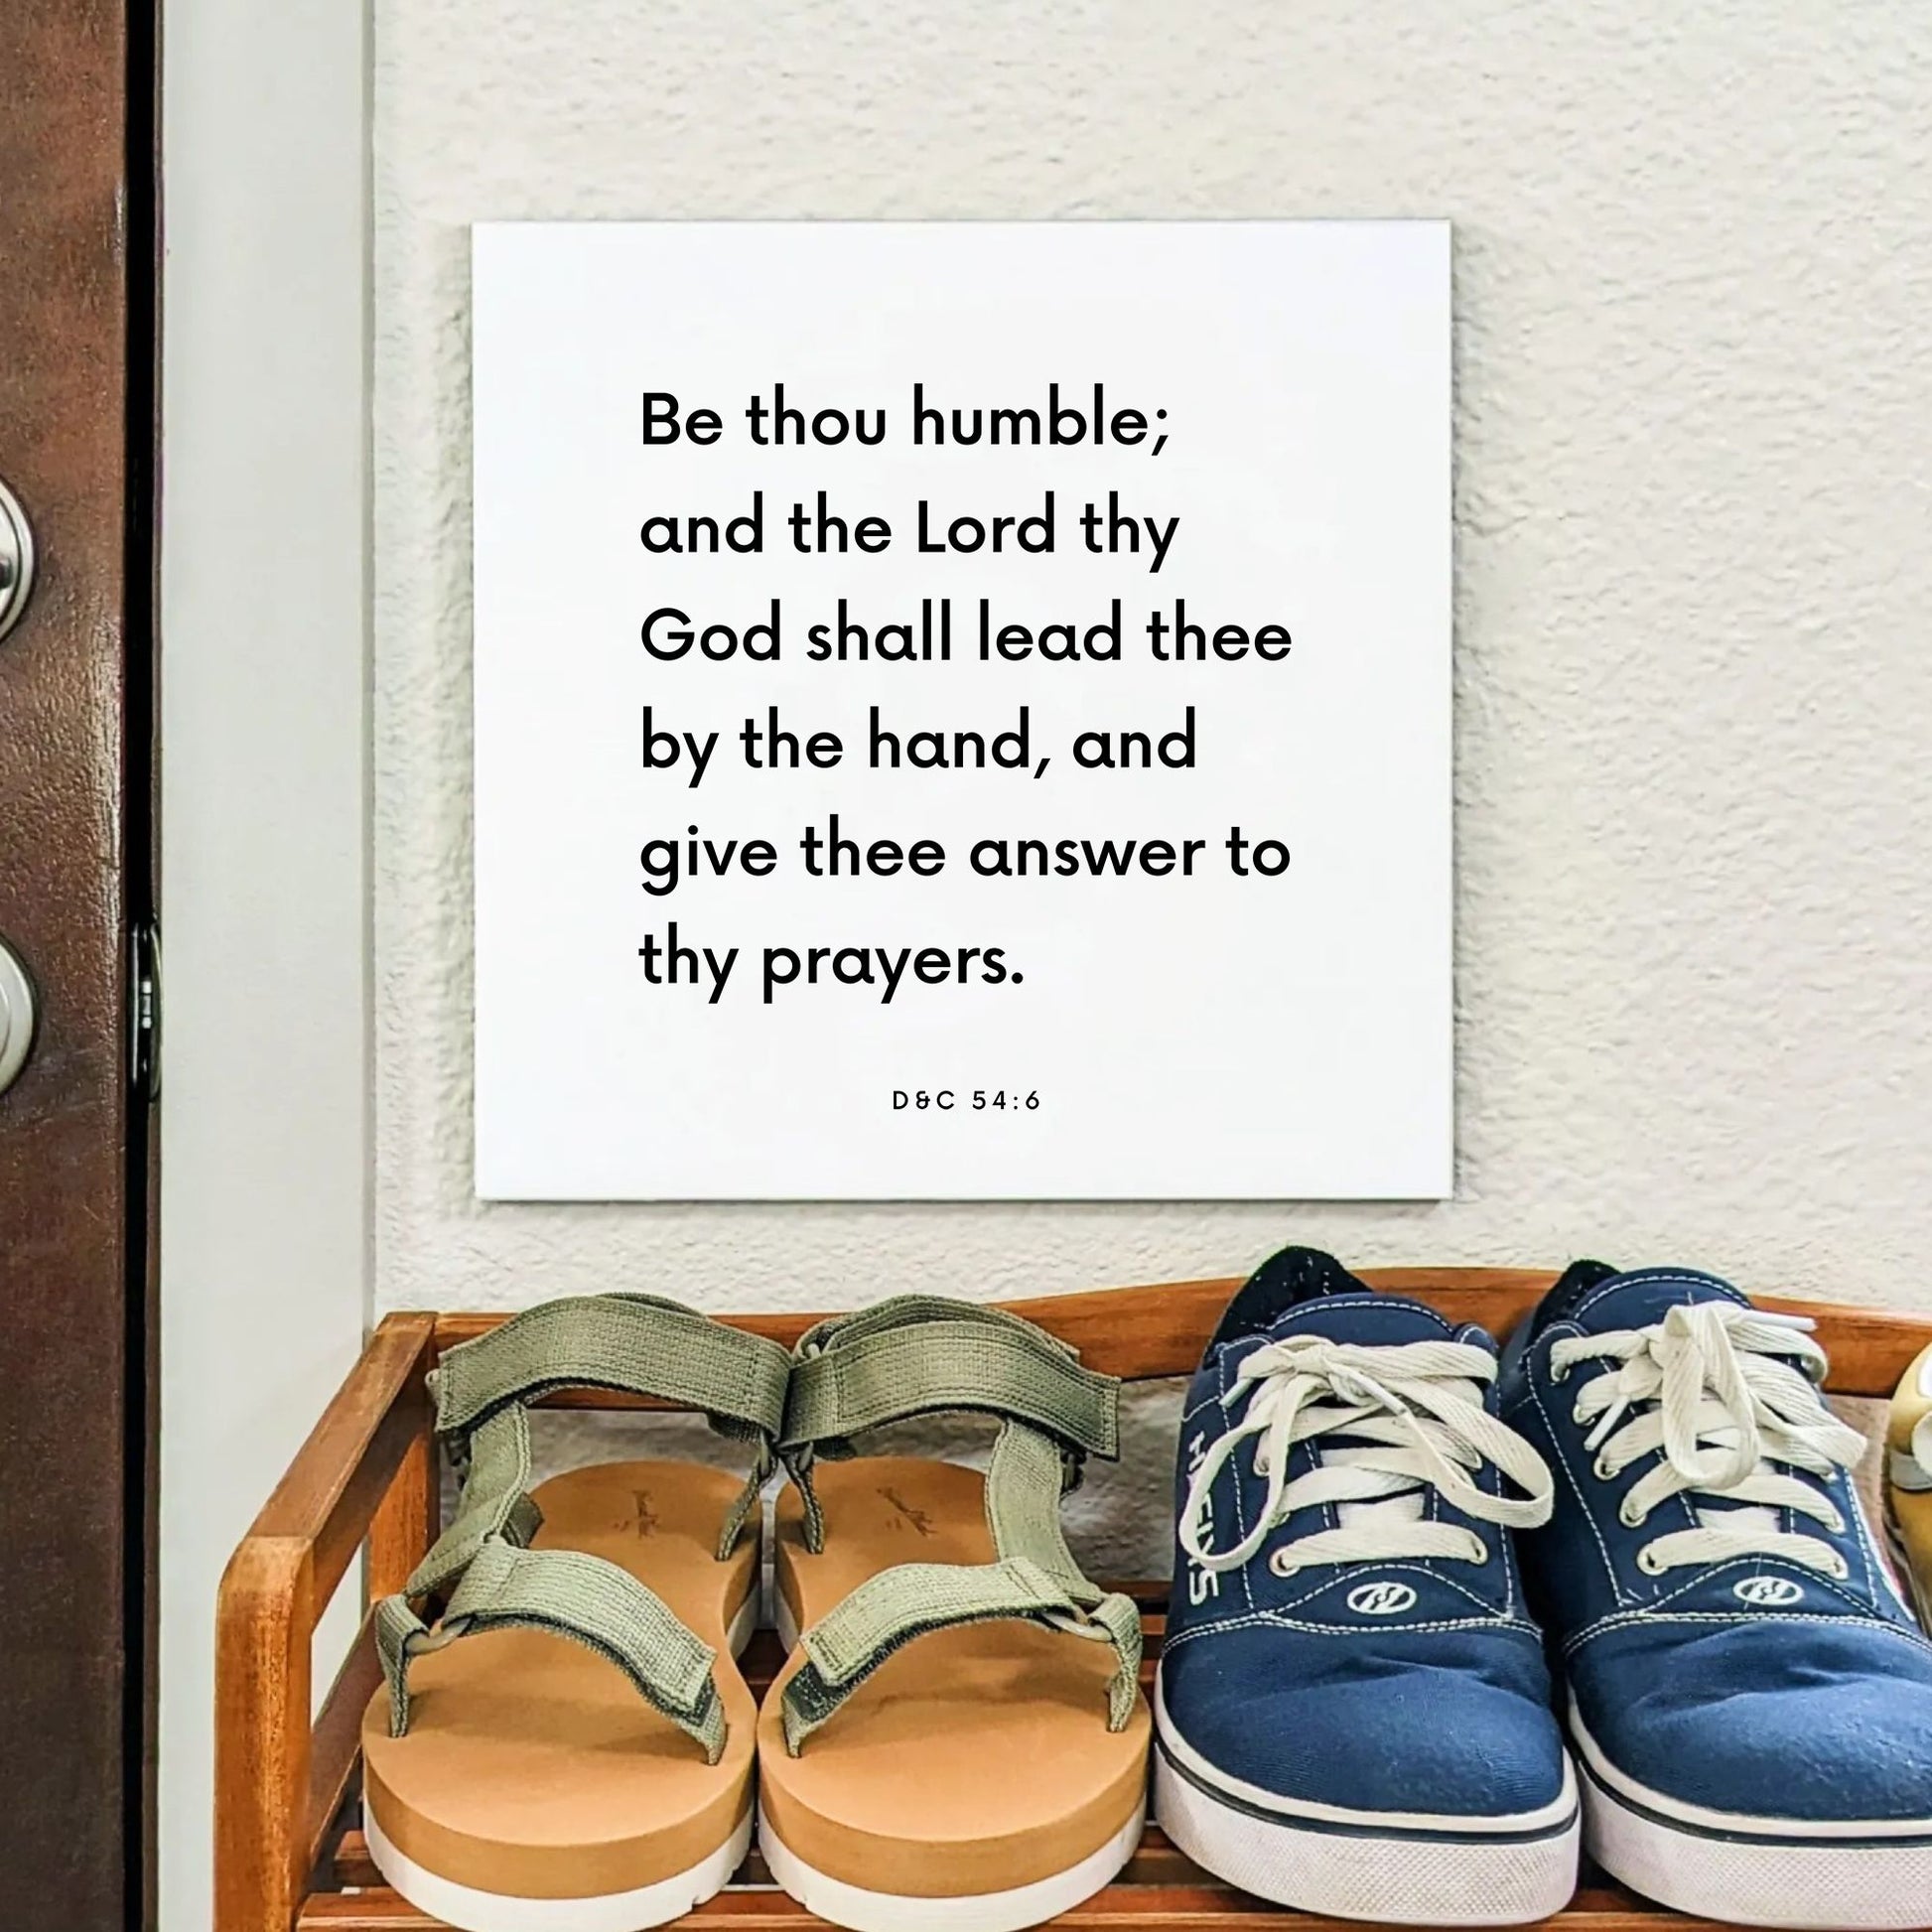 Shoes mouting of the scripture tile for D&C 112:10 - "Be thou humble; and the Lord thy God shall lead thee"